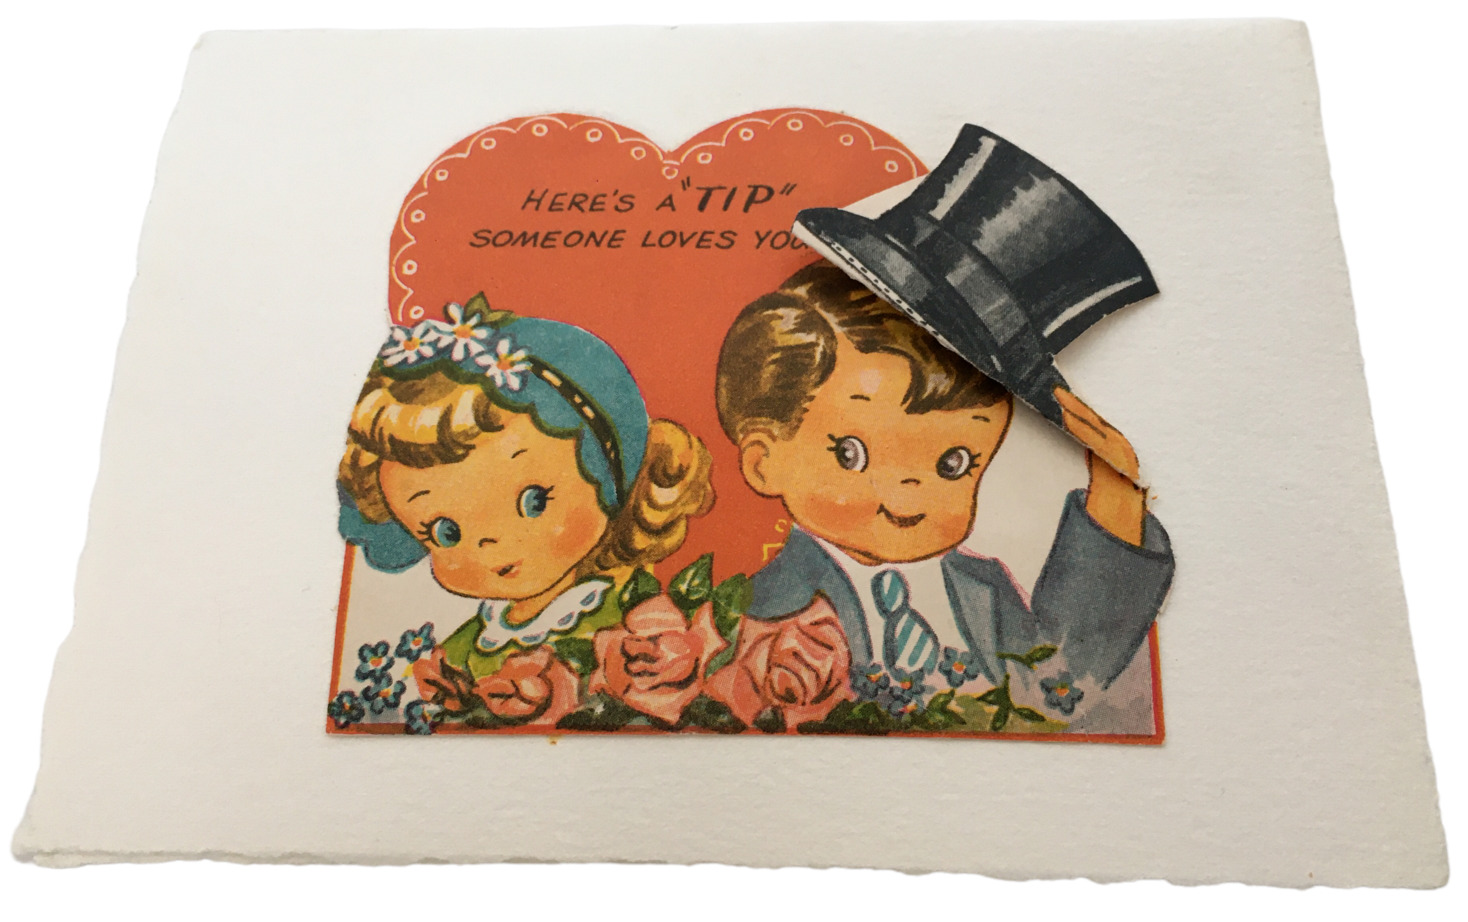 Vintage Valentines Day Card Here is a Tip Someone Love You Boy Top Hat 1940s